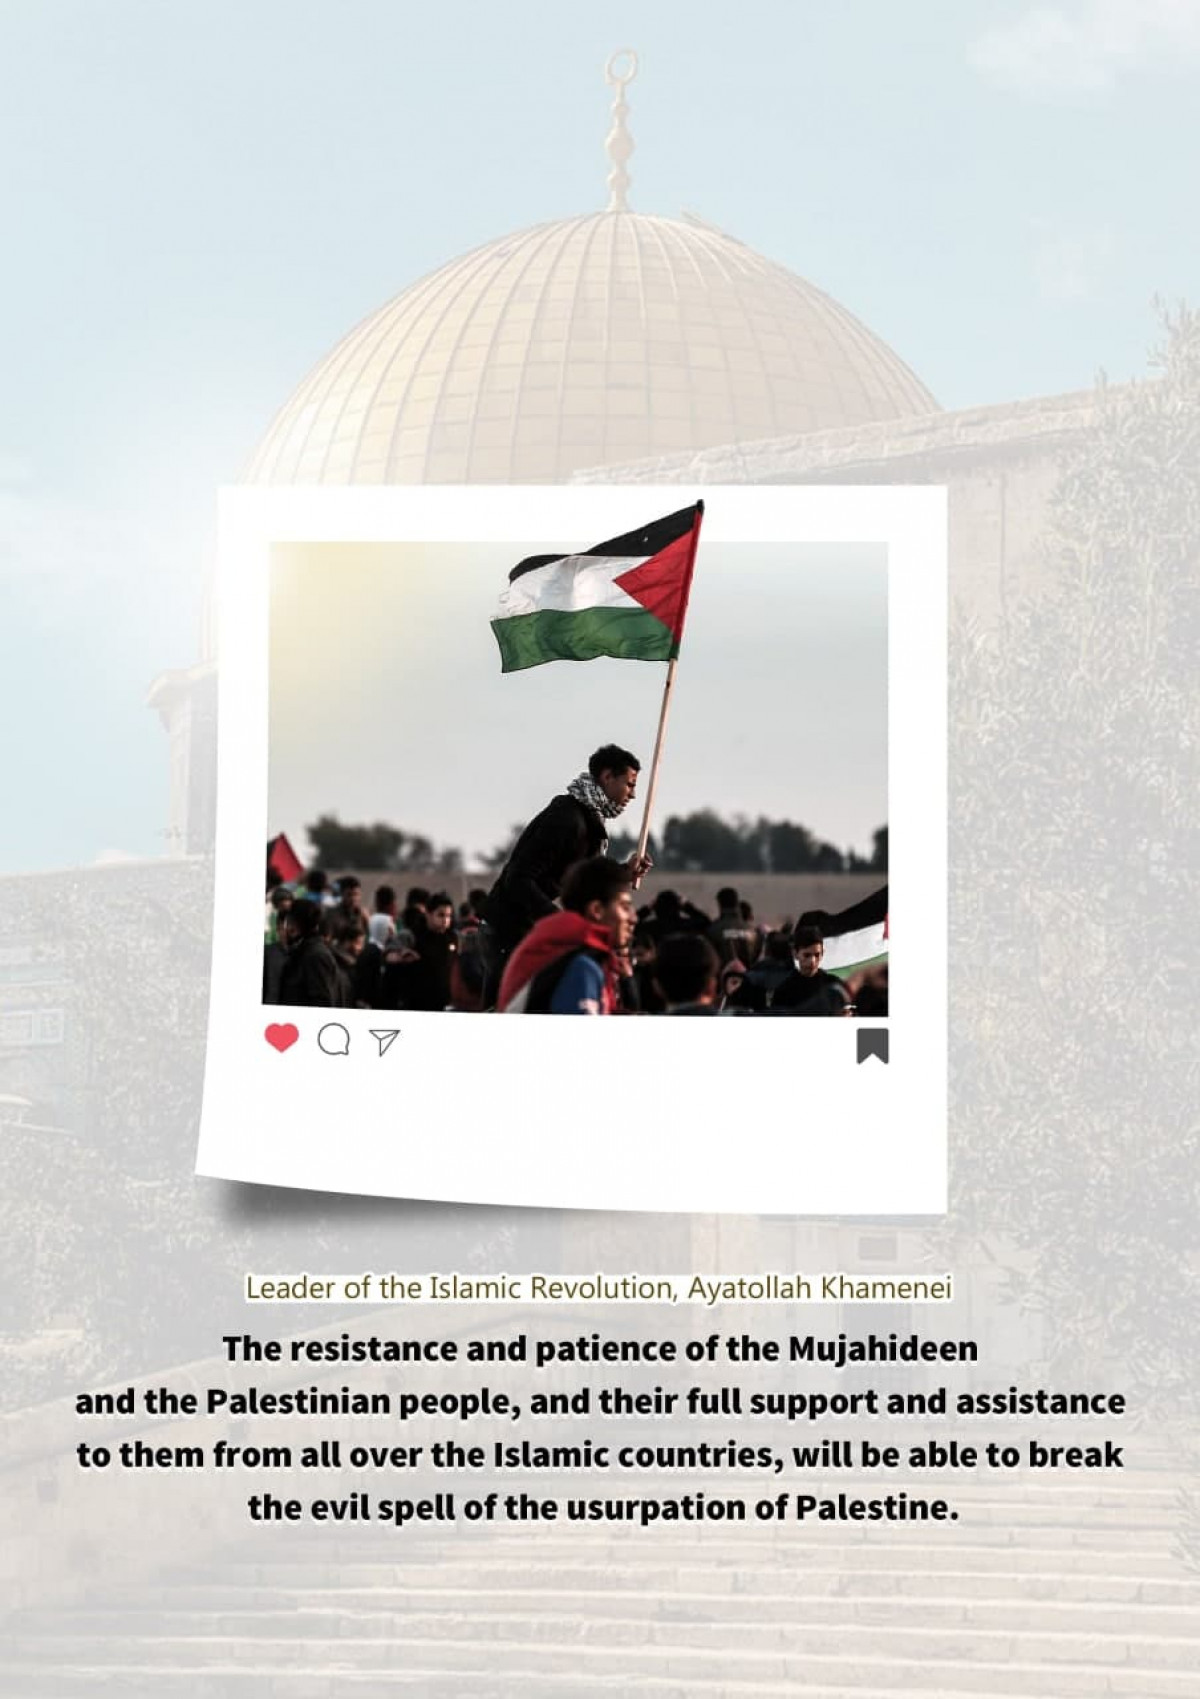 The resistance and patience of the Mujahideen and the Palestinian people